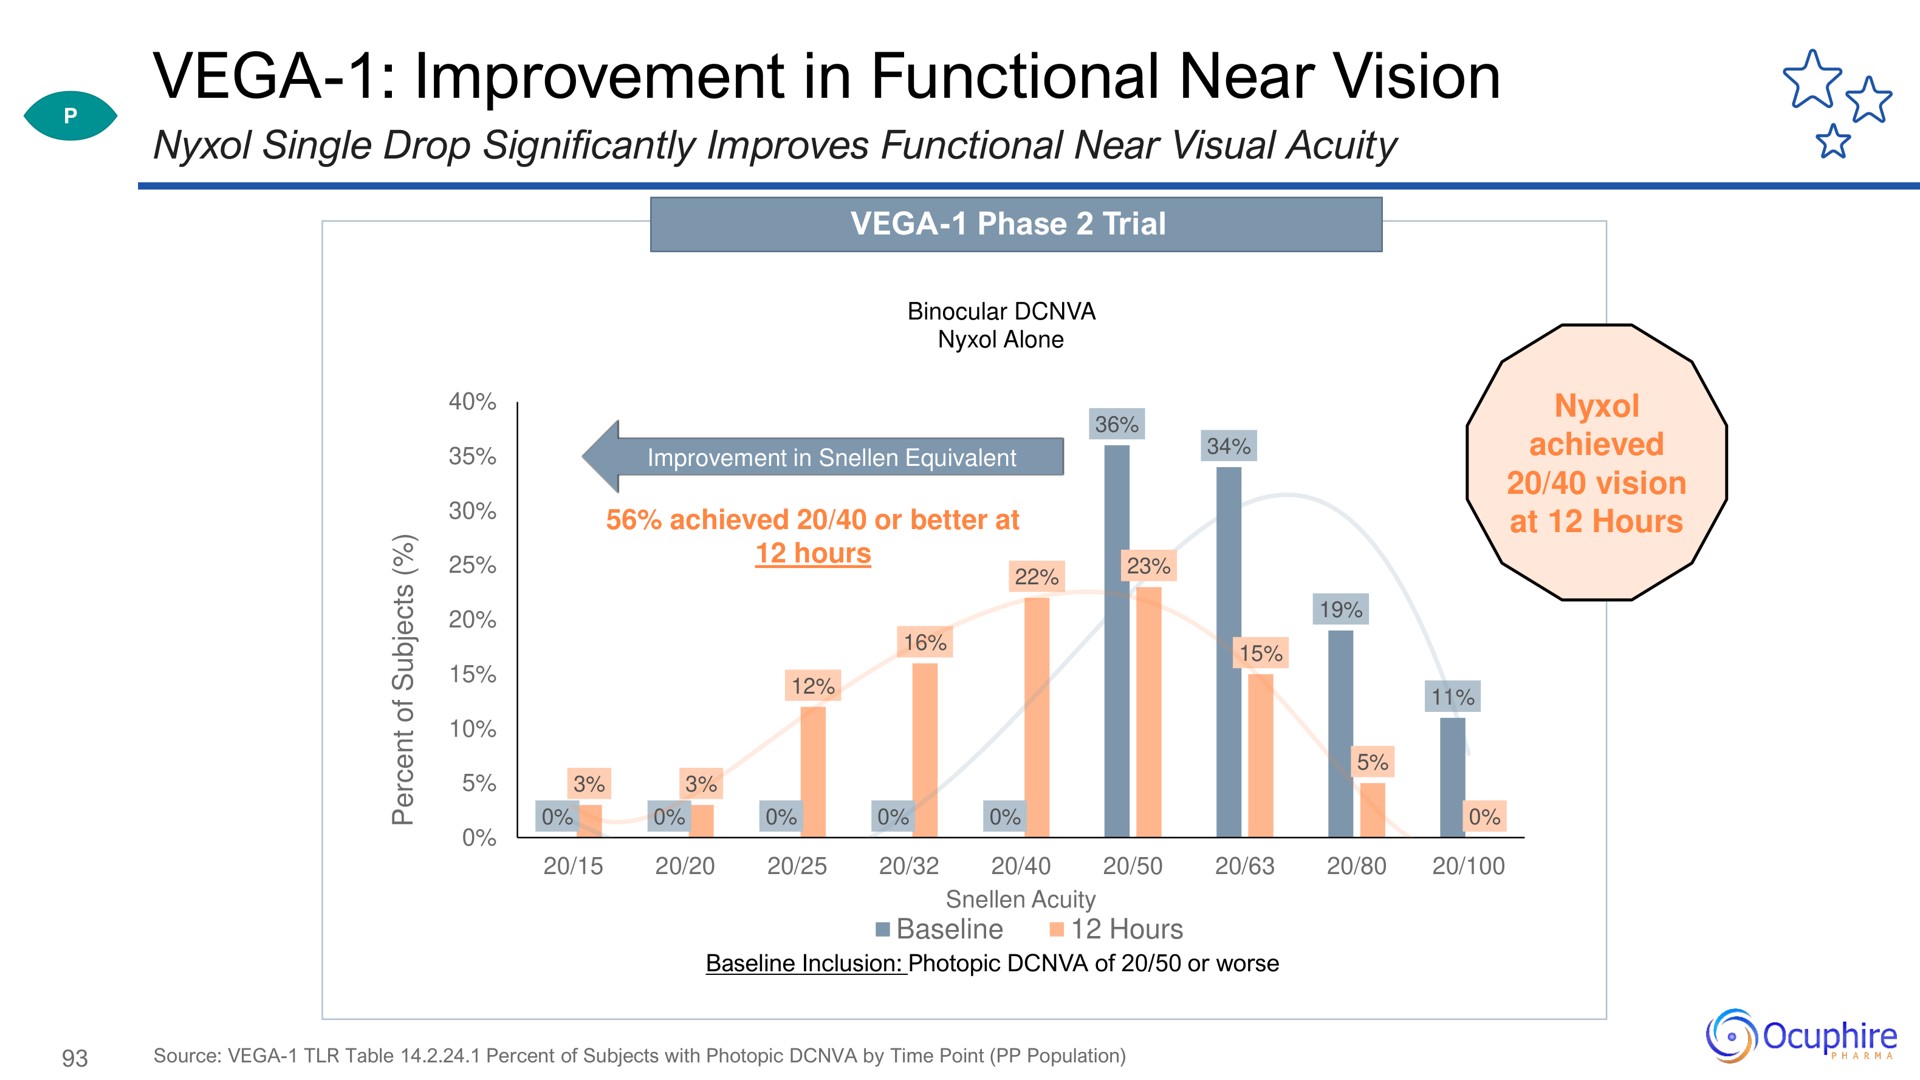 improvement in functional near vision | Ocuphire Pharma